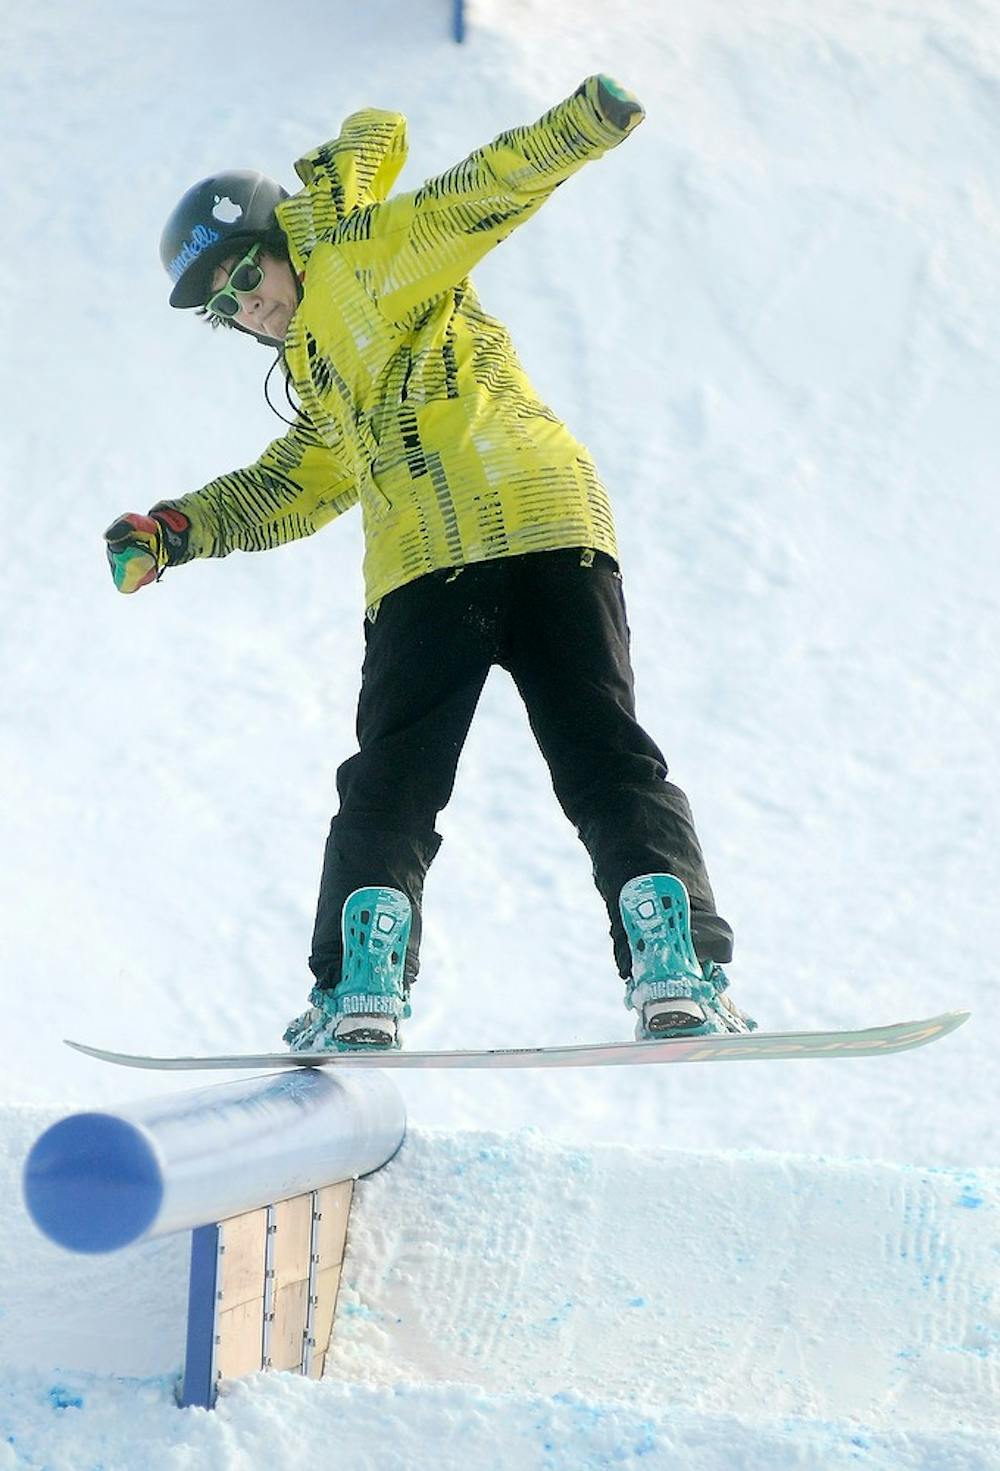 	<p>Northwood University student Mike Tonz does a front board slide down the mountain Jan. 5, 2013, at Hawk Island Snow Park 1601 E. Cavanaugh Rd., in Lansing. Tonz said he was there with Middle Earth Snowboard Series, which hosts snowboard events throughout Michigan. Natalie Kolb/The State News</p>